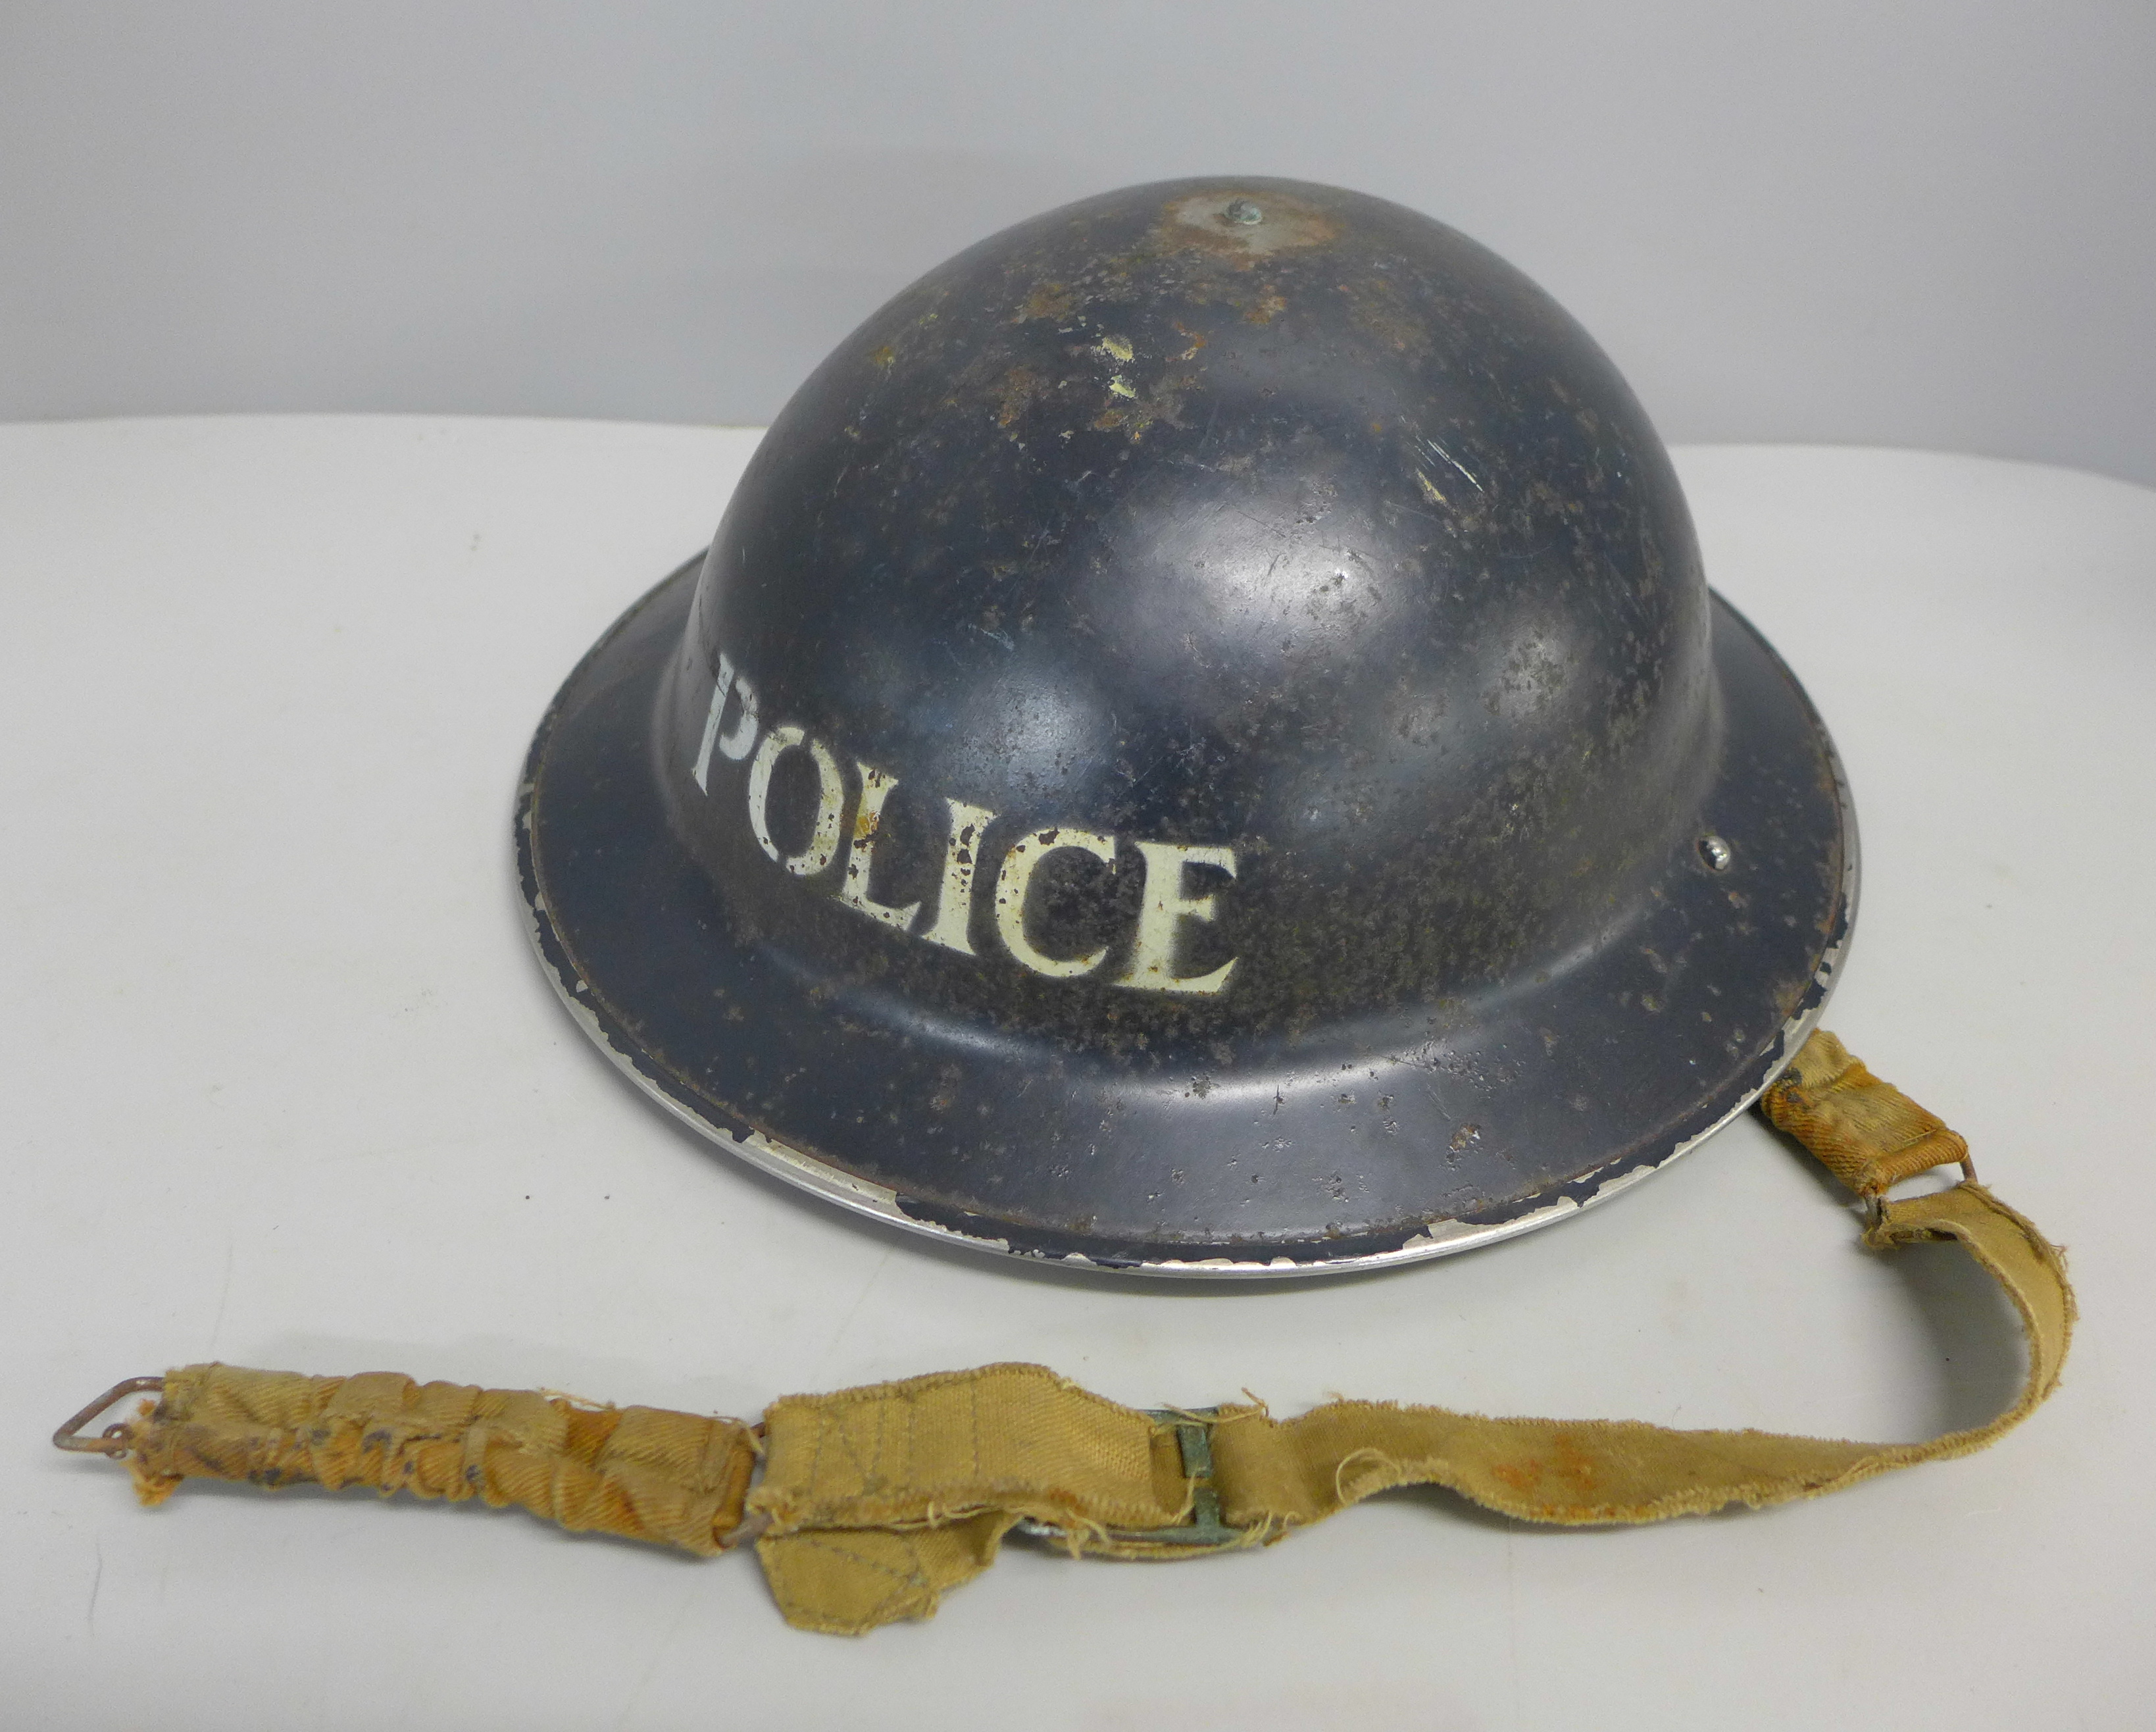 A WWII police helmet